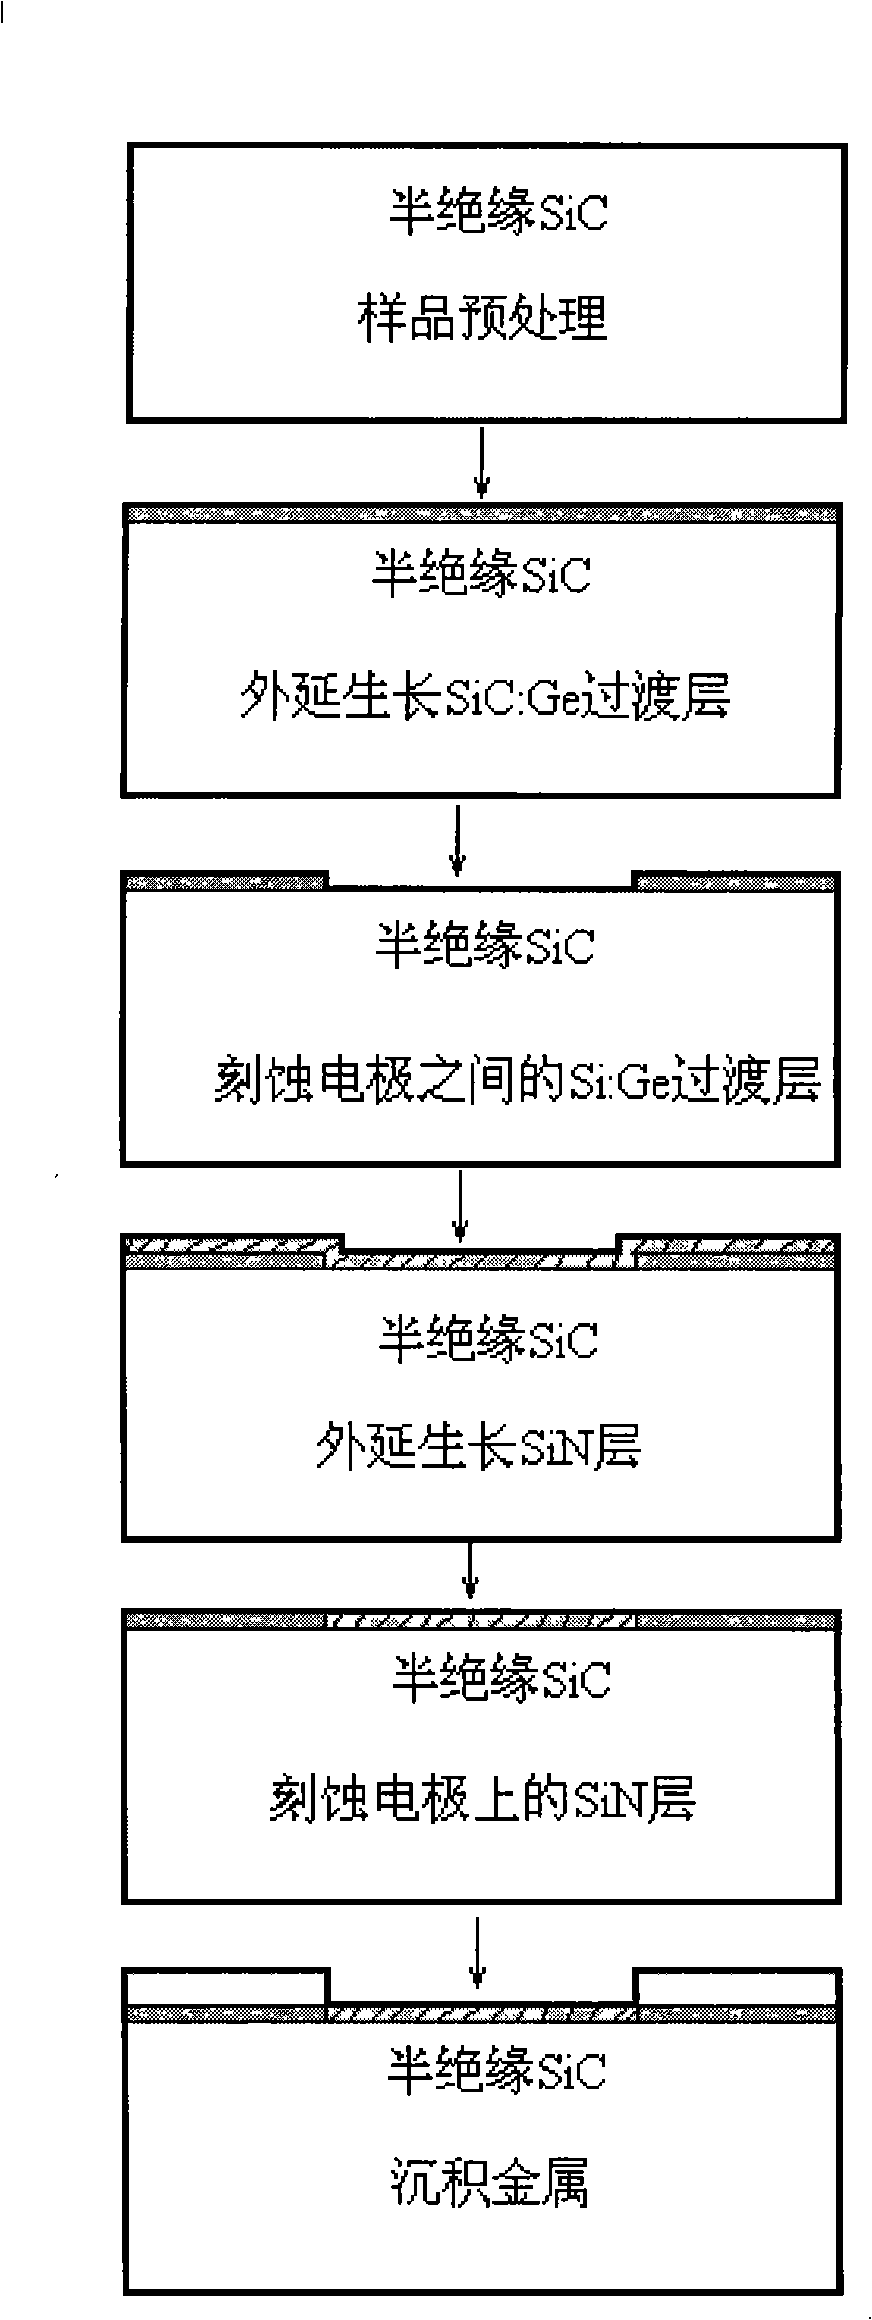 Ohm contact production method of semi-insulation SiC semiconductor device